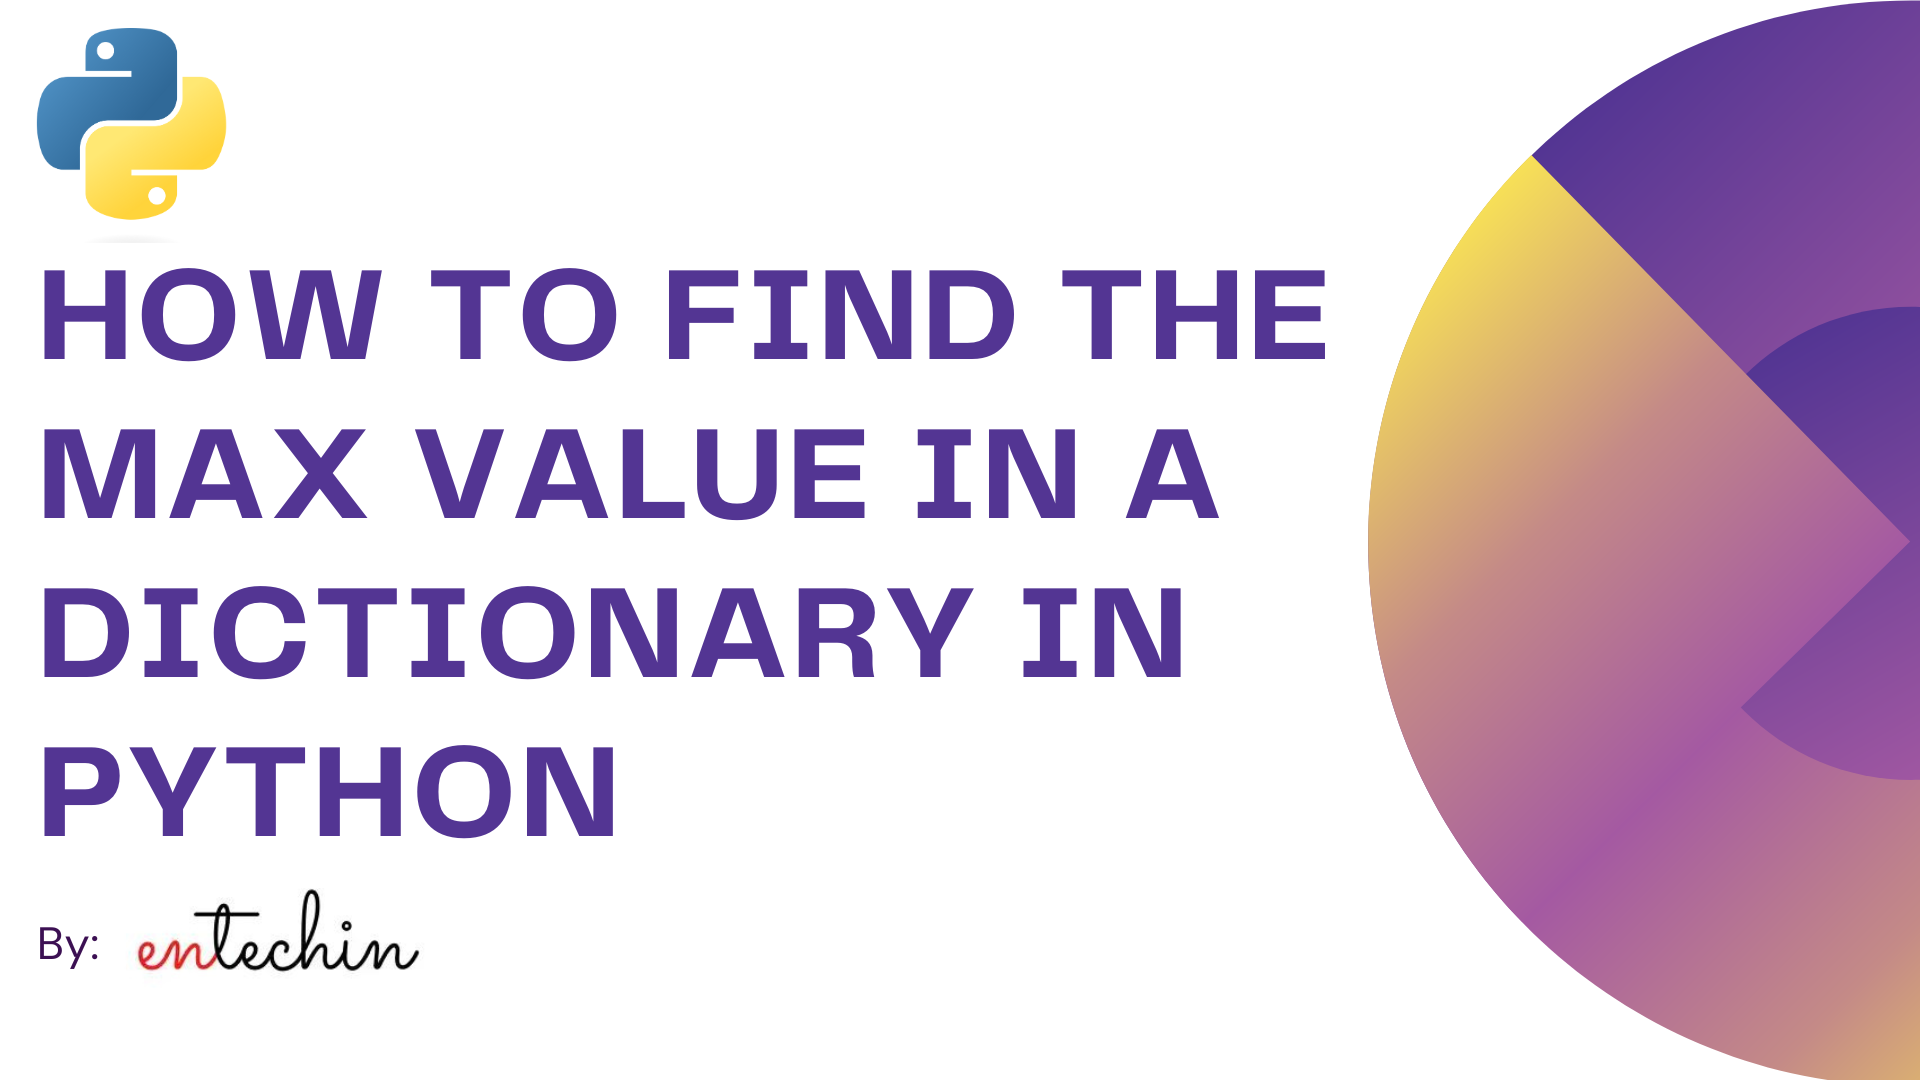 How to find the max value in a dictionary in Python